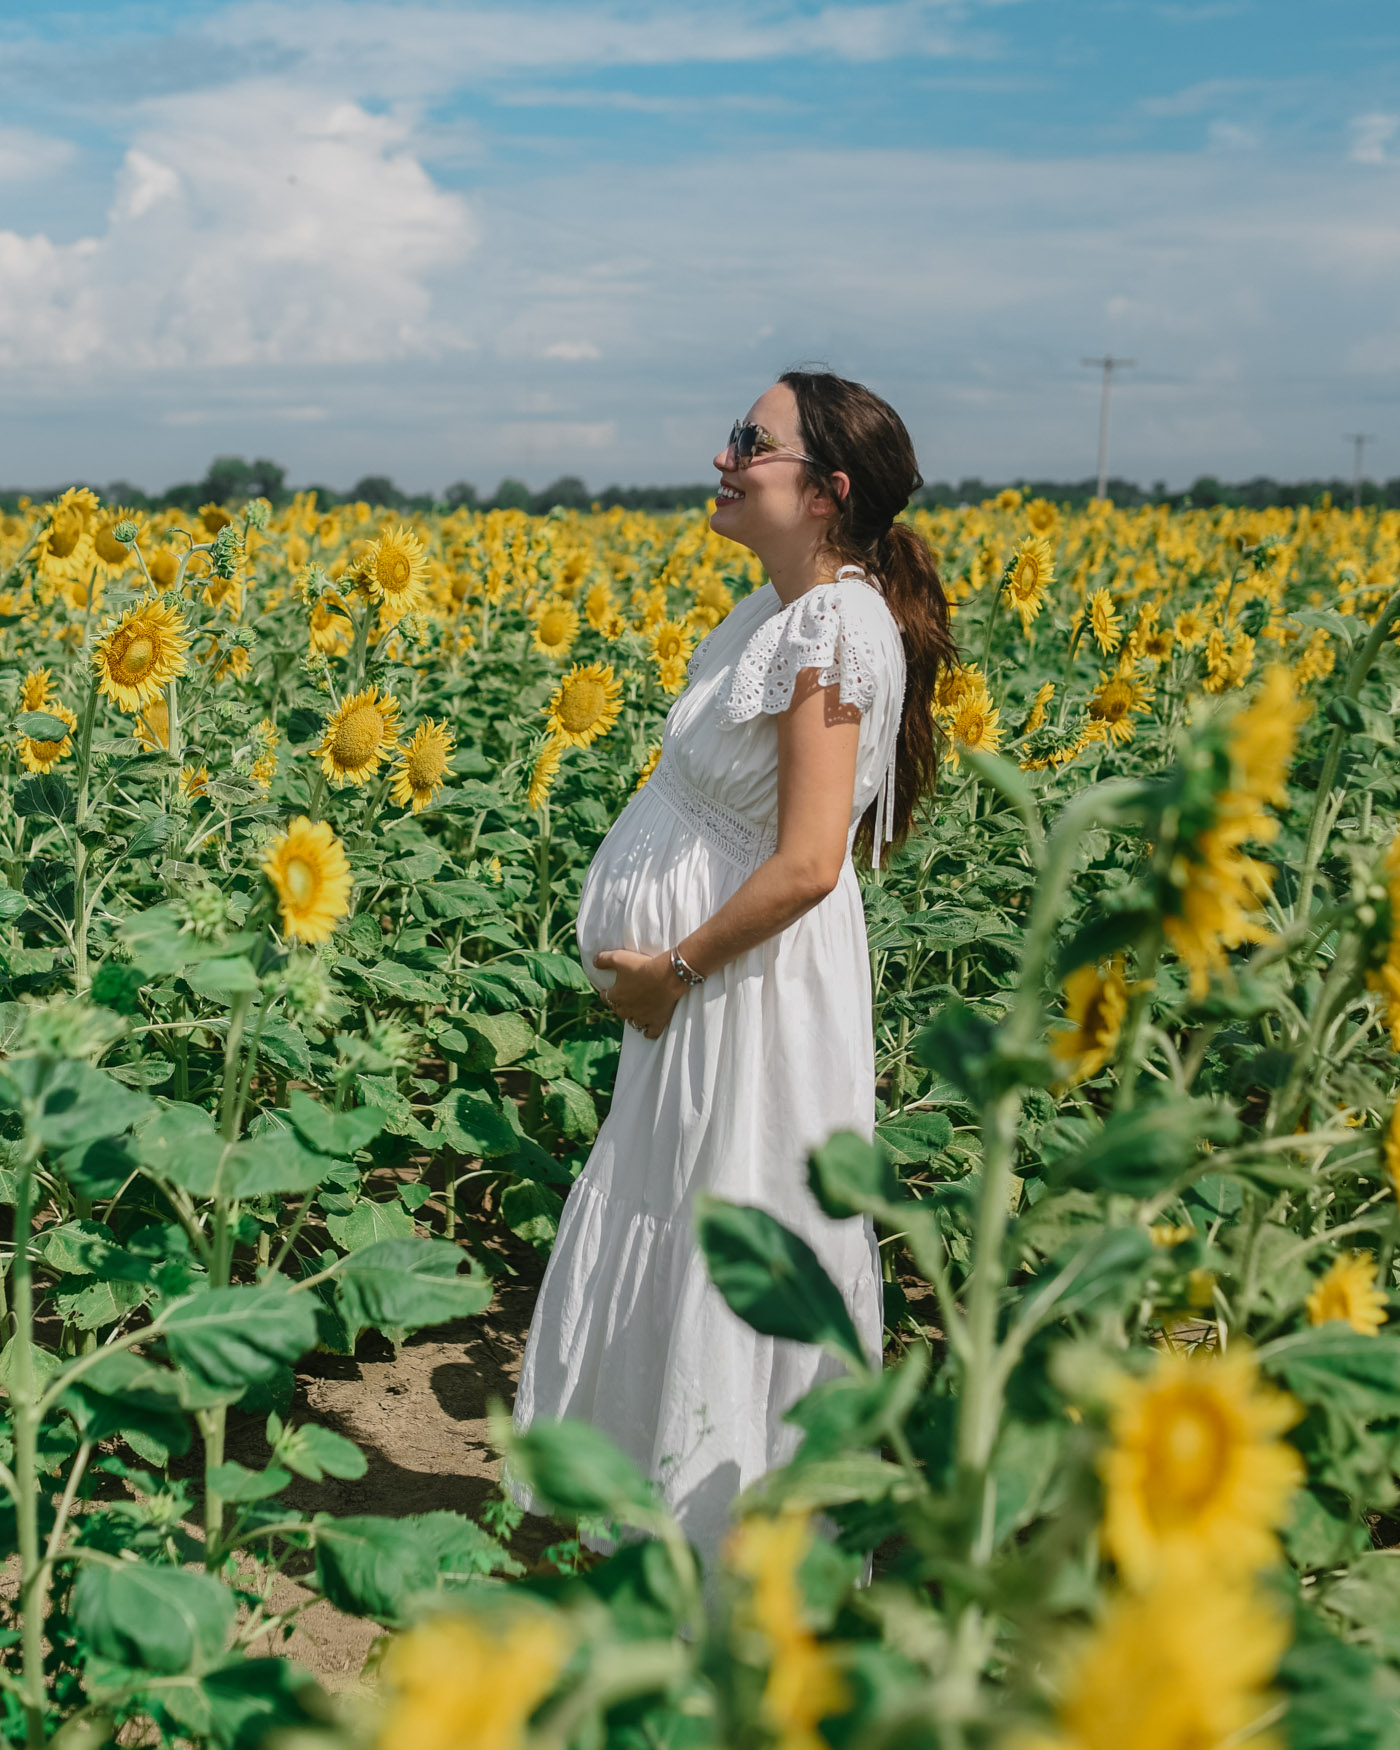 30 Weeks Pregnant by popular Memphis motherhood blog, Lone Star Looking Glass: image of a woman standing in a field of sunflowers and wearing a ChicWish FRILL HEM PLUNGING V-NECK SLEEVELESS MAXI DRESS IN WHITE, Swedish Hasbeens Kringlan, and Free People Western Cuff Set.